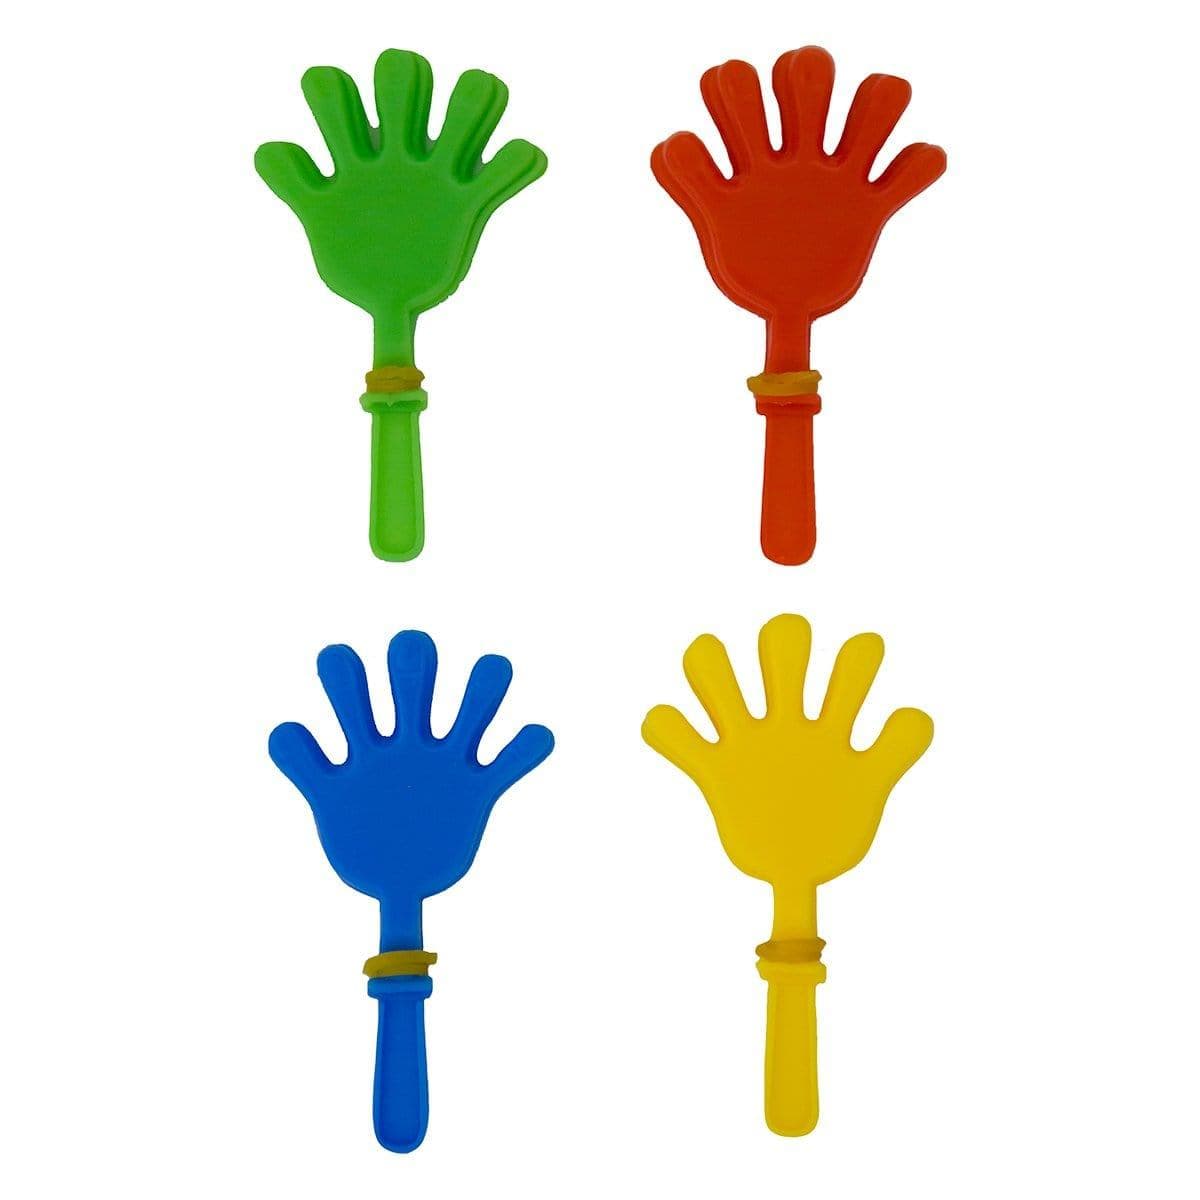 Buy Kids Birthday Hand clappers, 8 per package sold at Party Expert